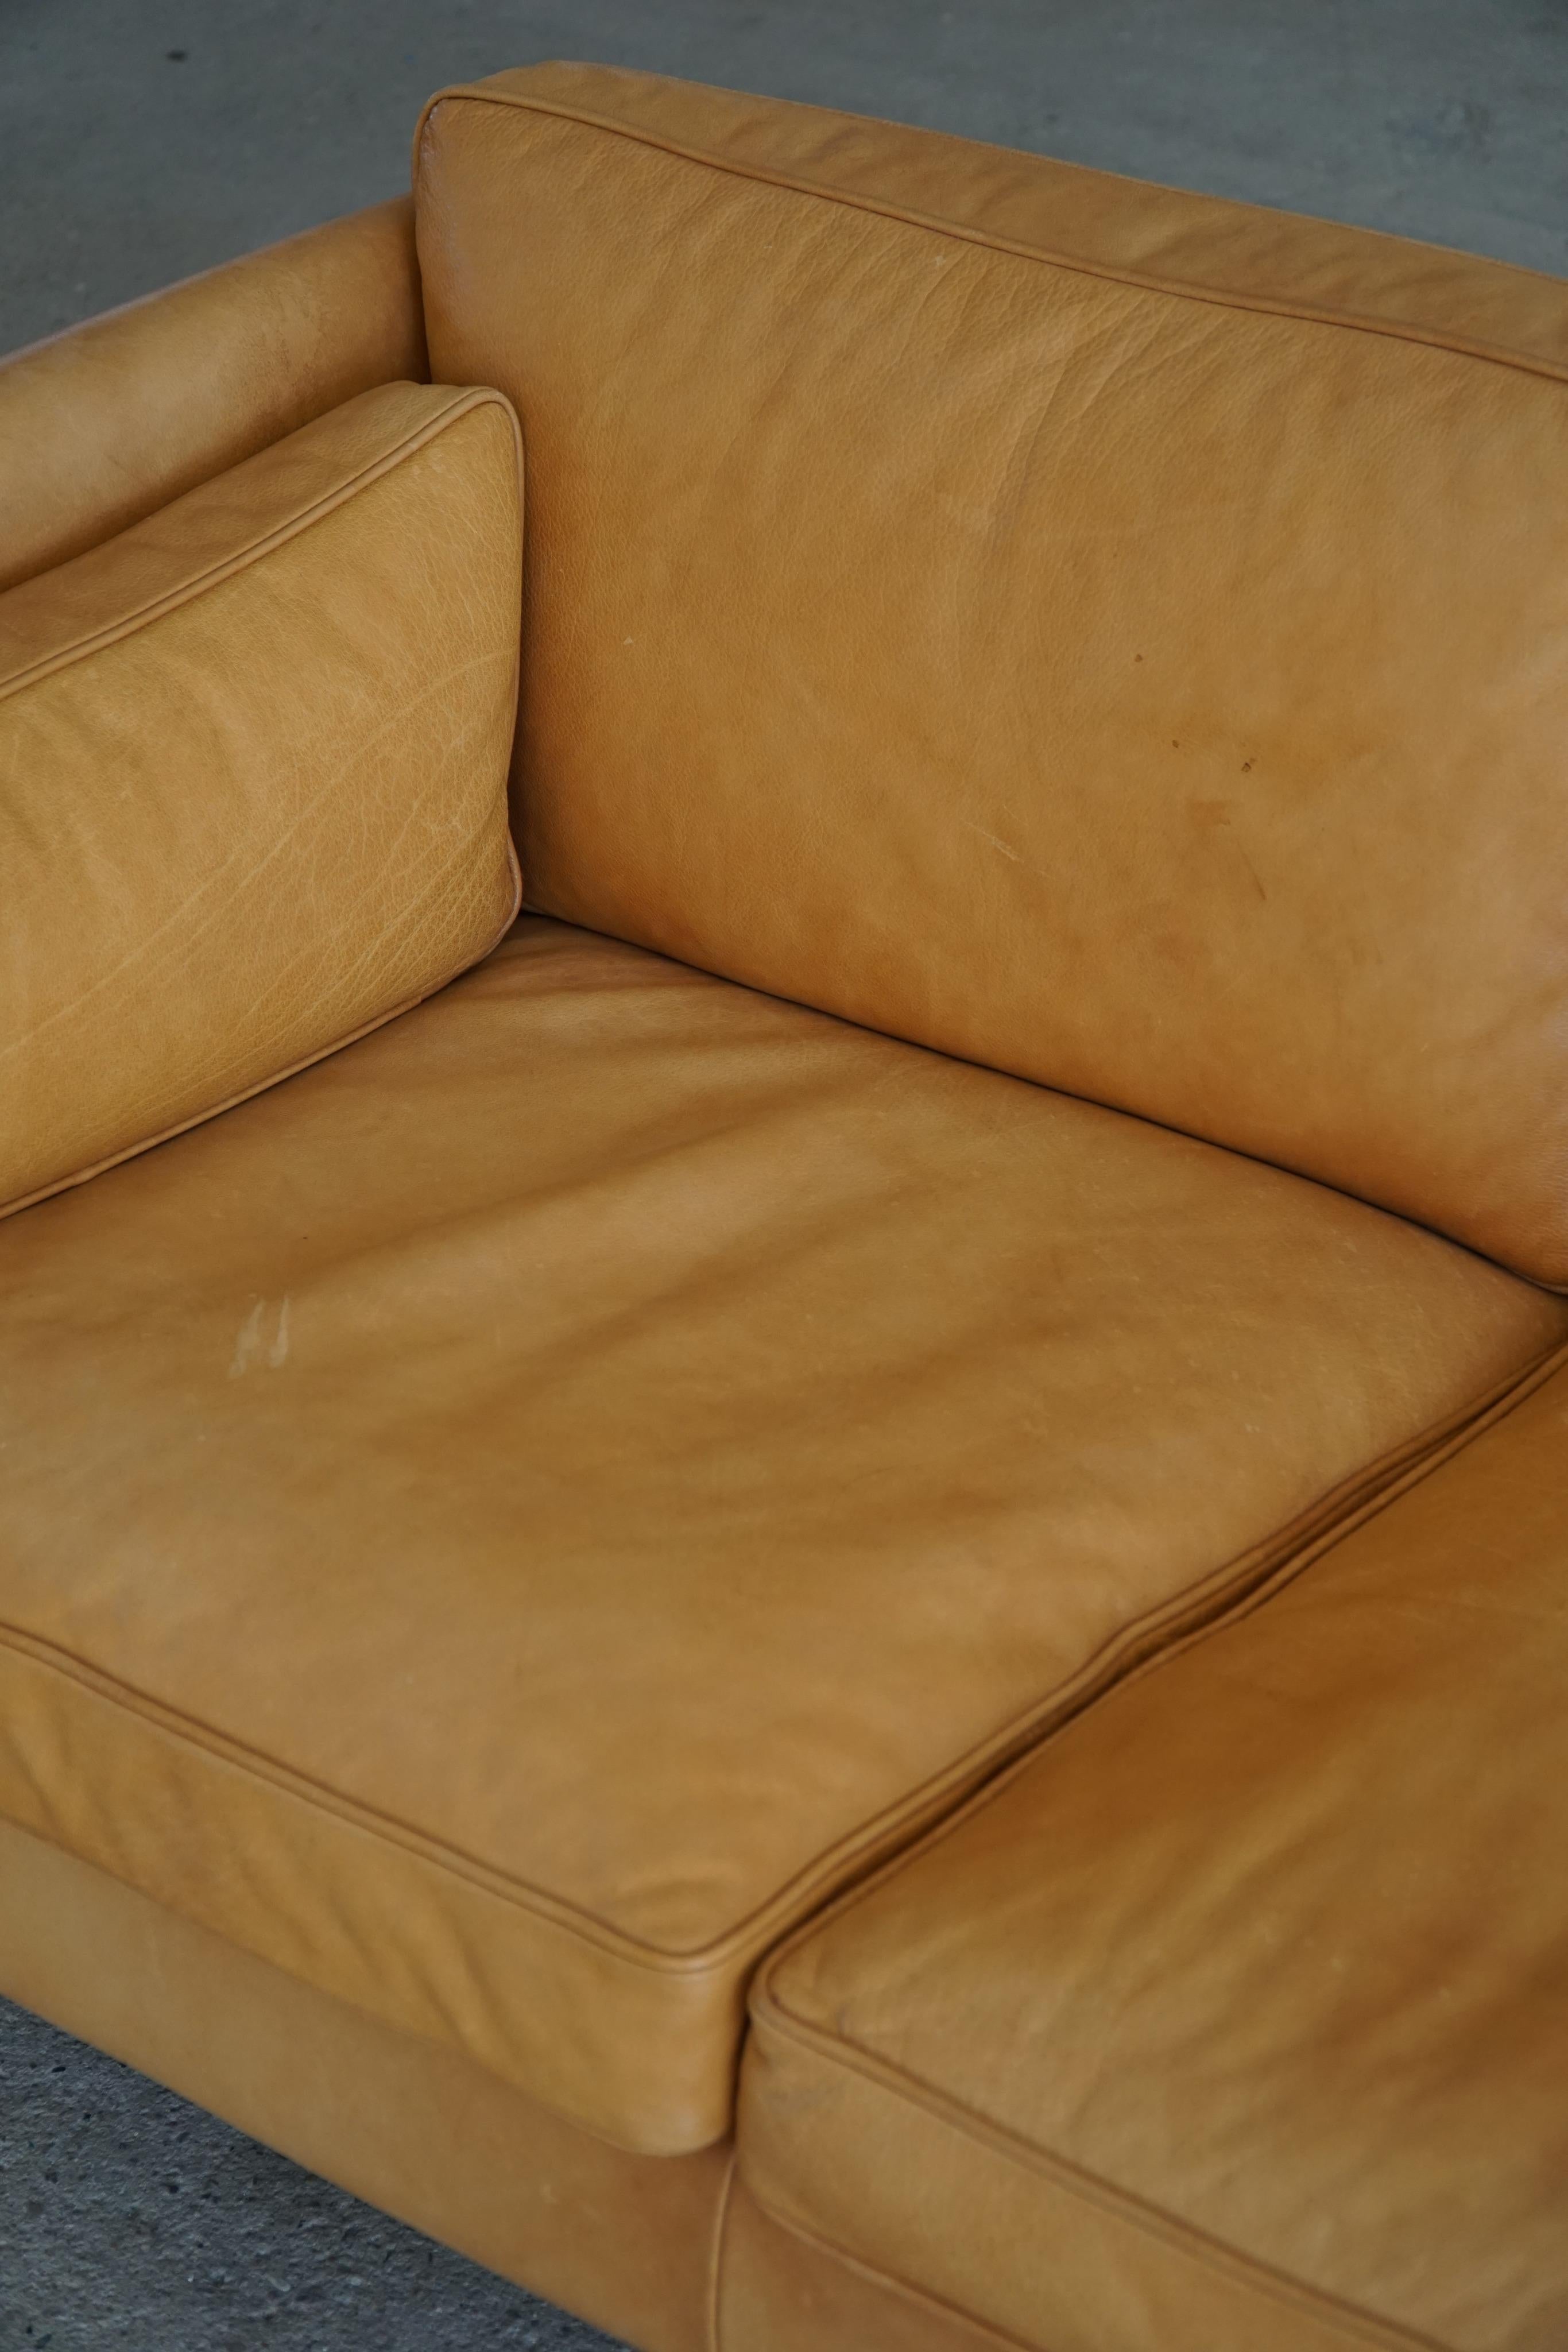 Danish Midcentury Stouby 3-Seater Sofa in Cognac Brown Leather, Made in 1970s For Sale 4